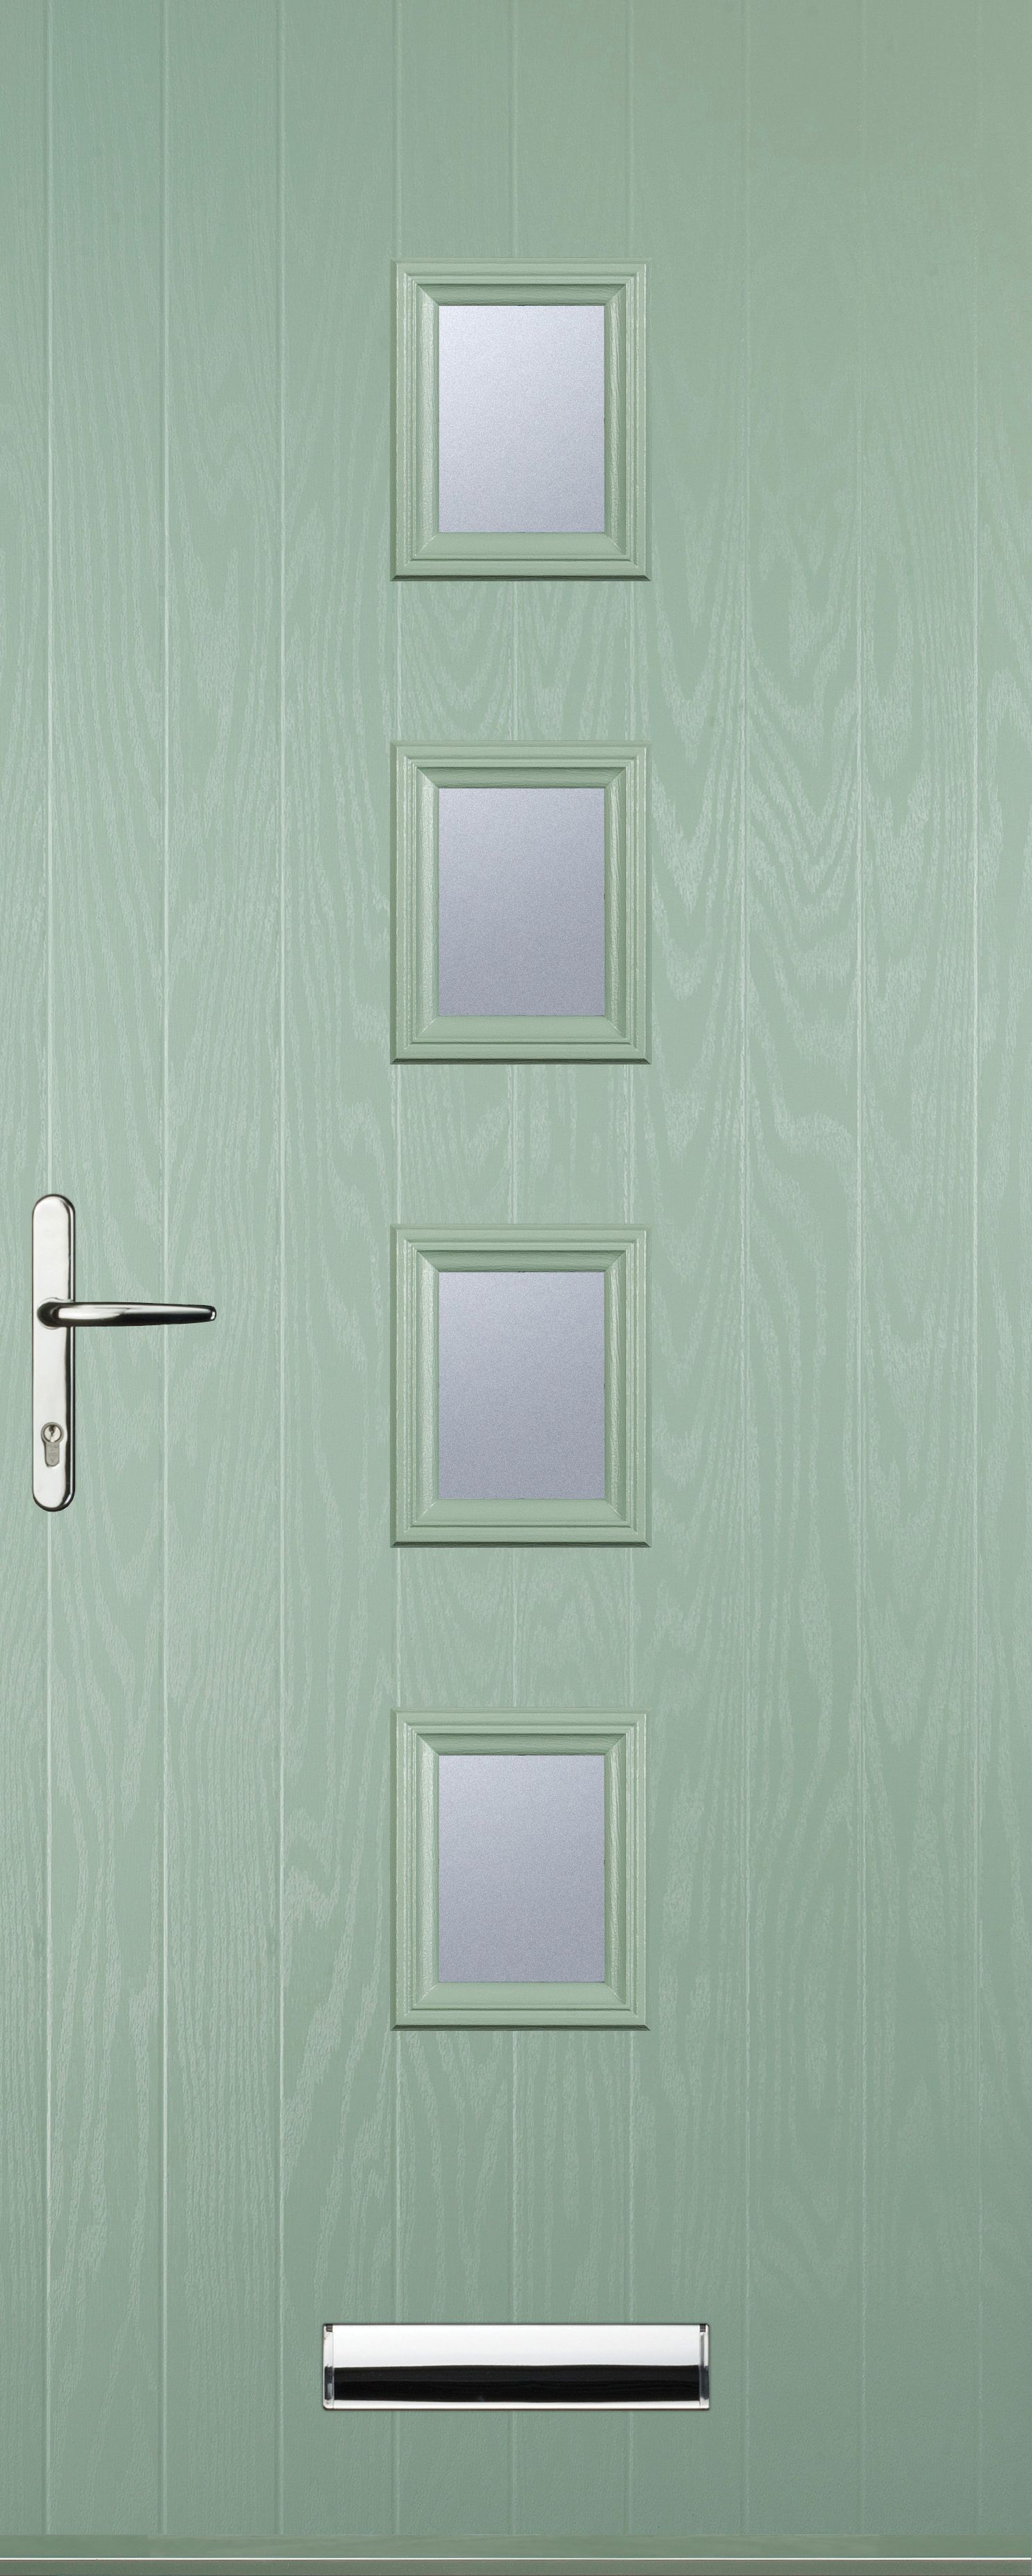 Image of Euramax 4 Square Right Hand Chartwell Green Composite Door - 880 x 2100mm